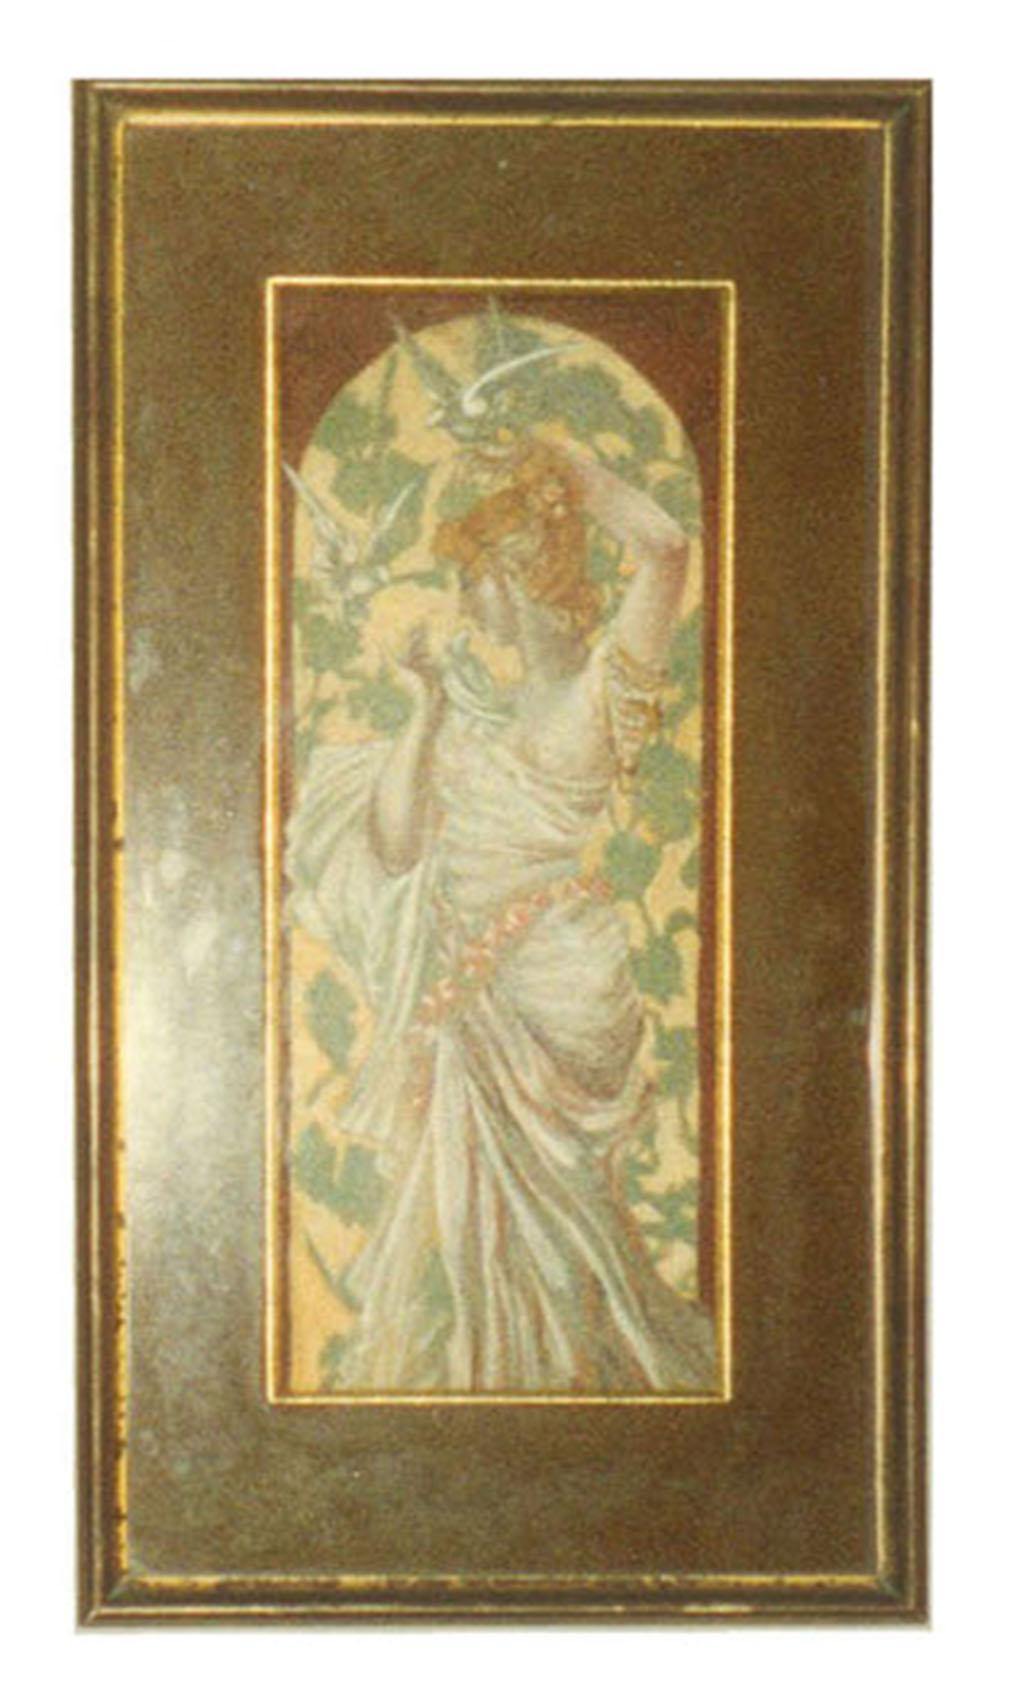 Set of Four French Art Nouveau Pastels, Attributed to Alphonse Mucha 1